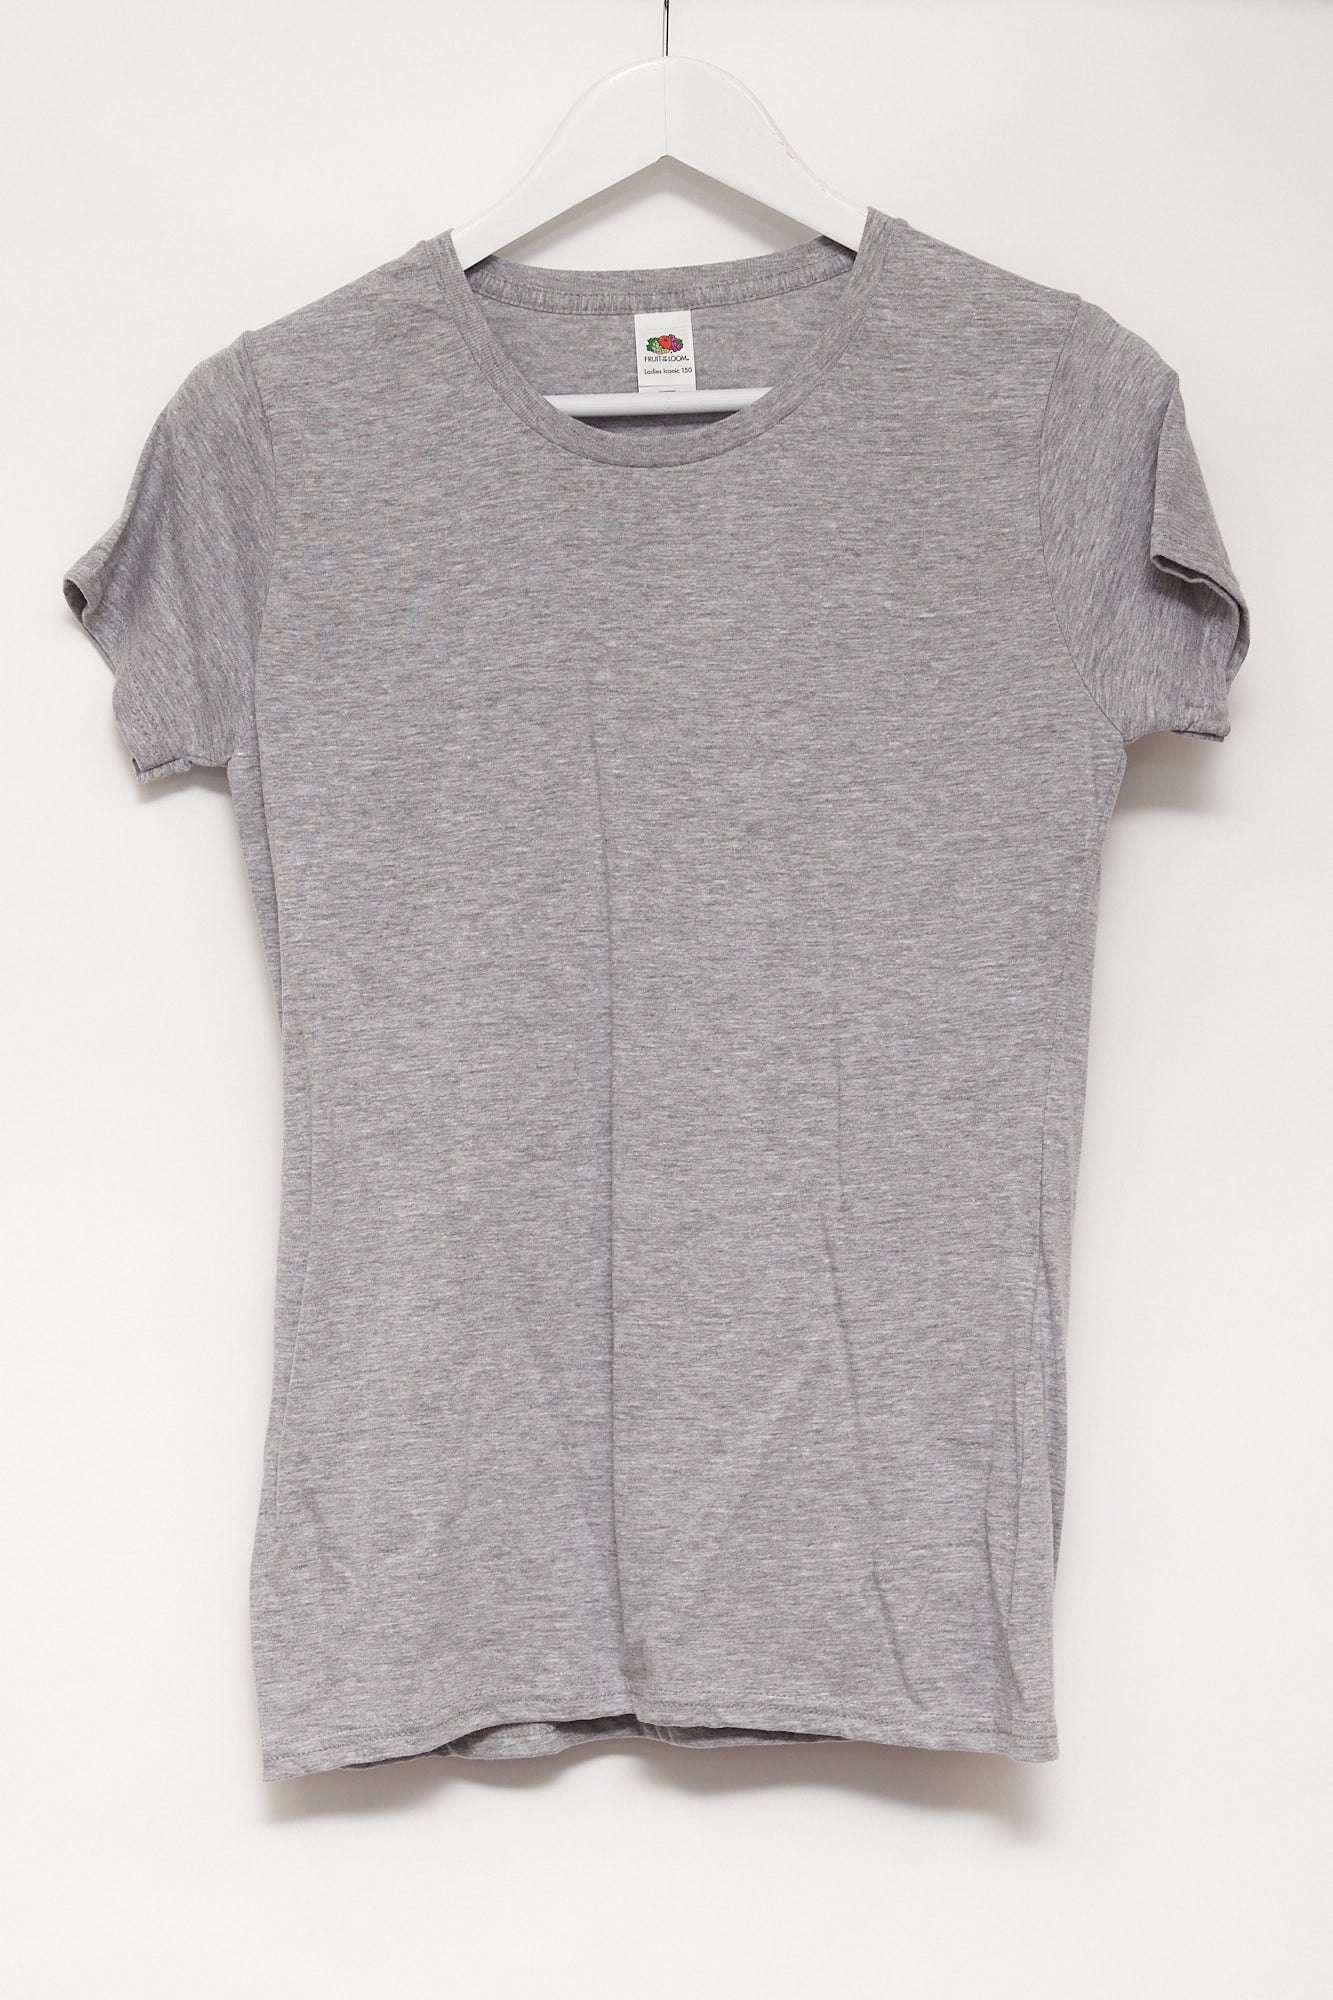 Womens Fruit of the Loom Grey T-shirt size small